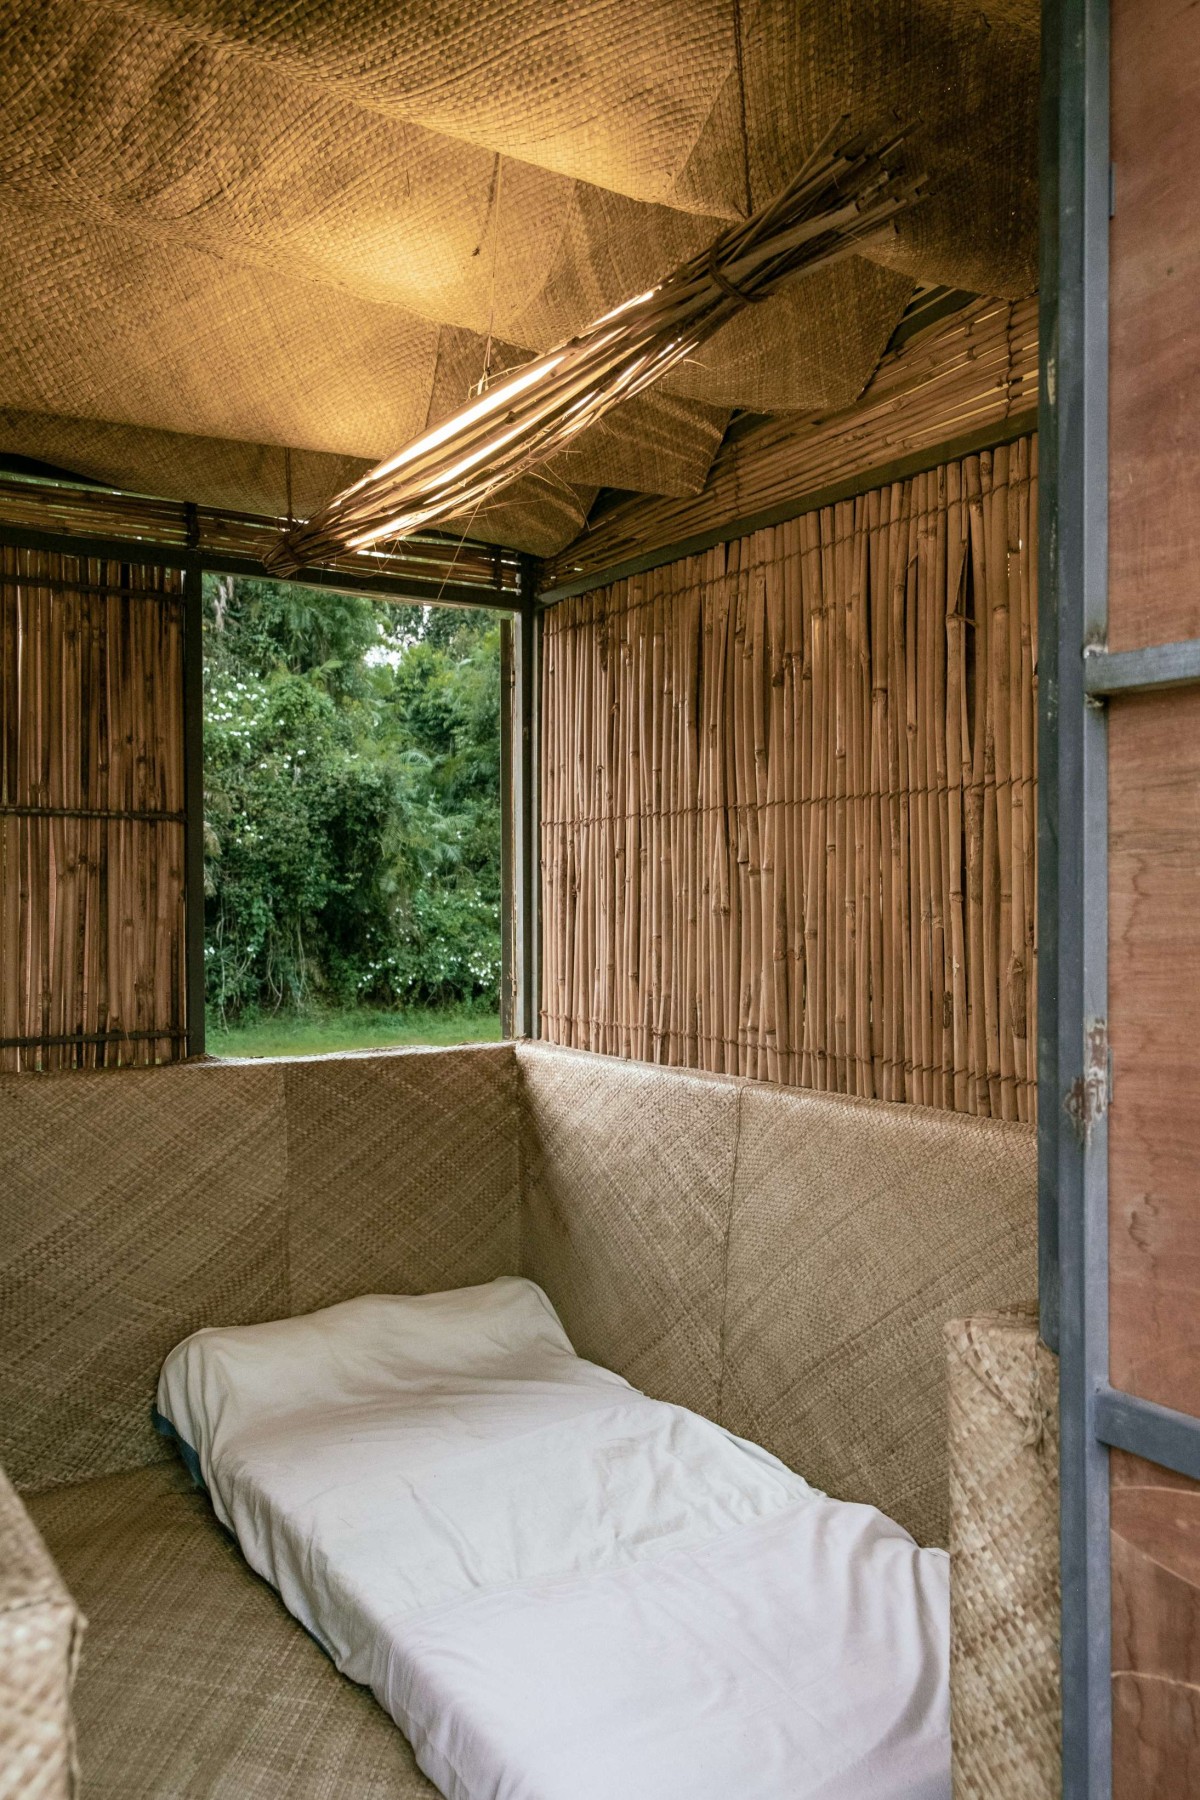 Bedroom of Worker’s Pavilion by NO Architects Designers and Social Artists